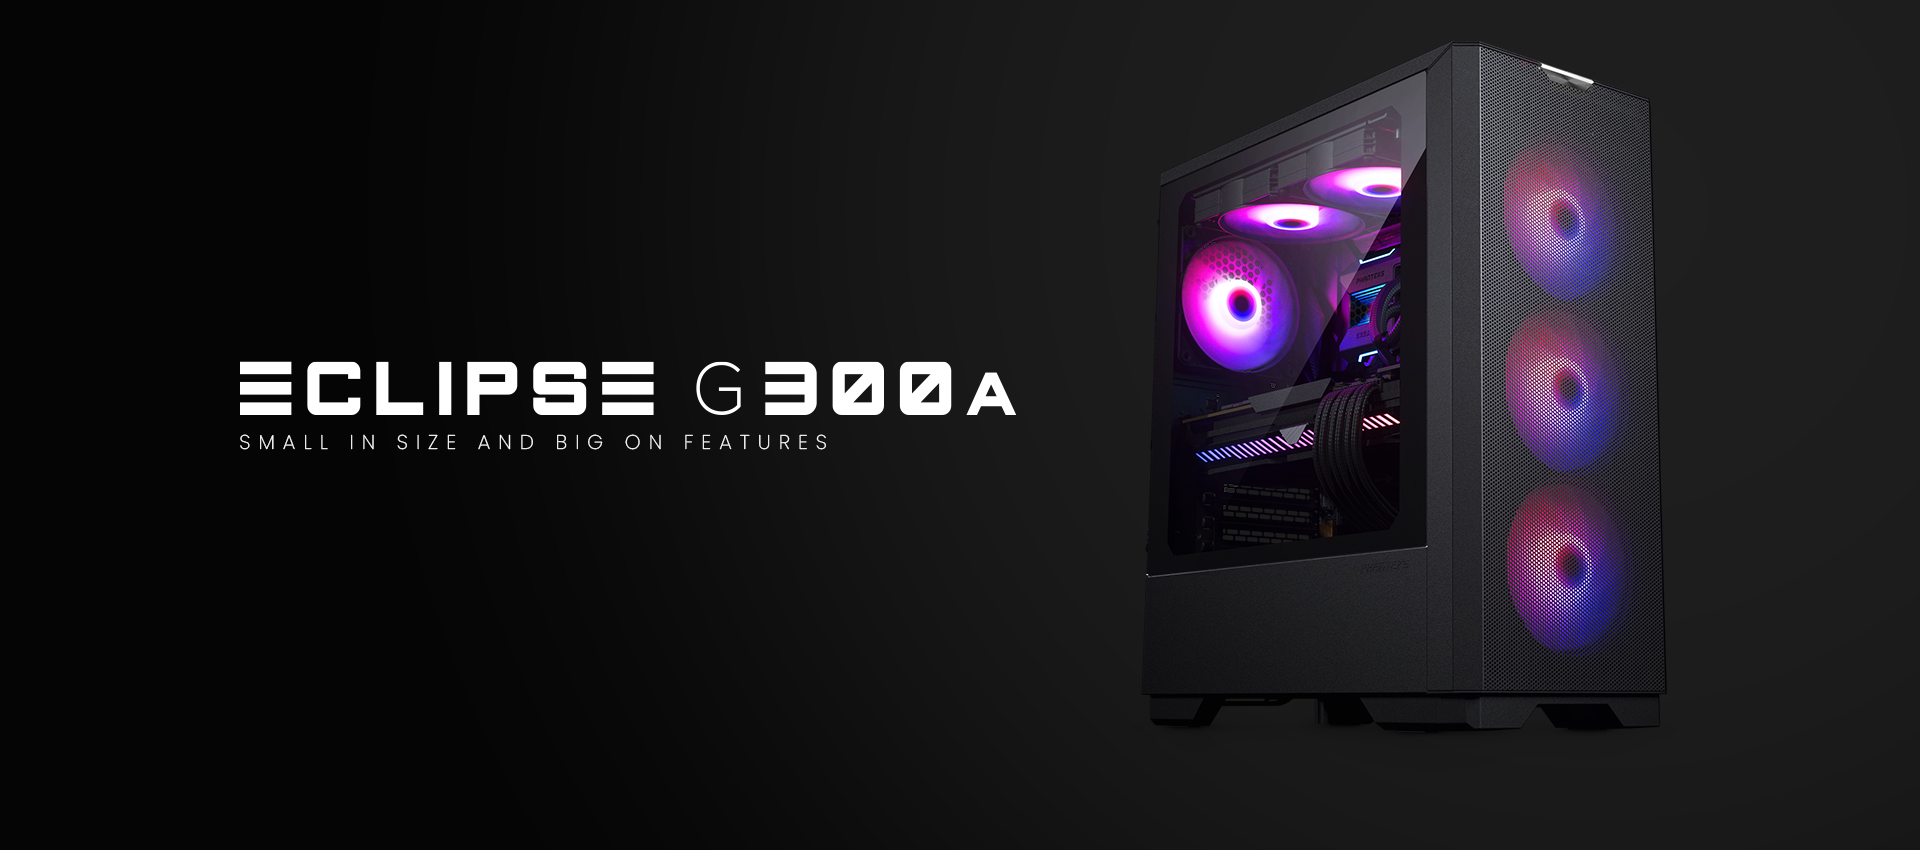 Banner Image of Eclipse G300A